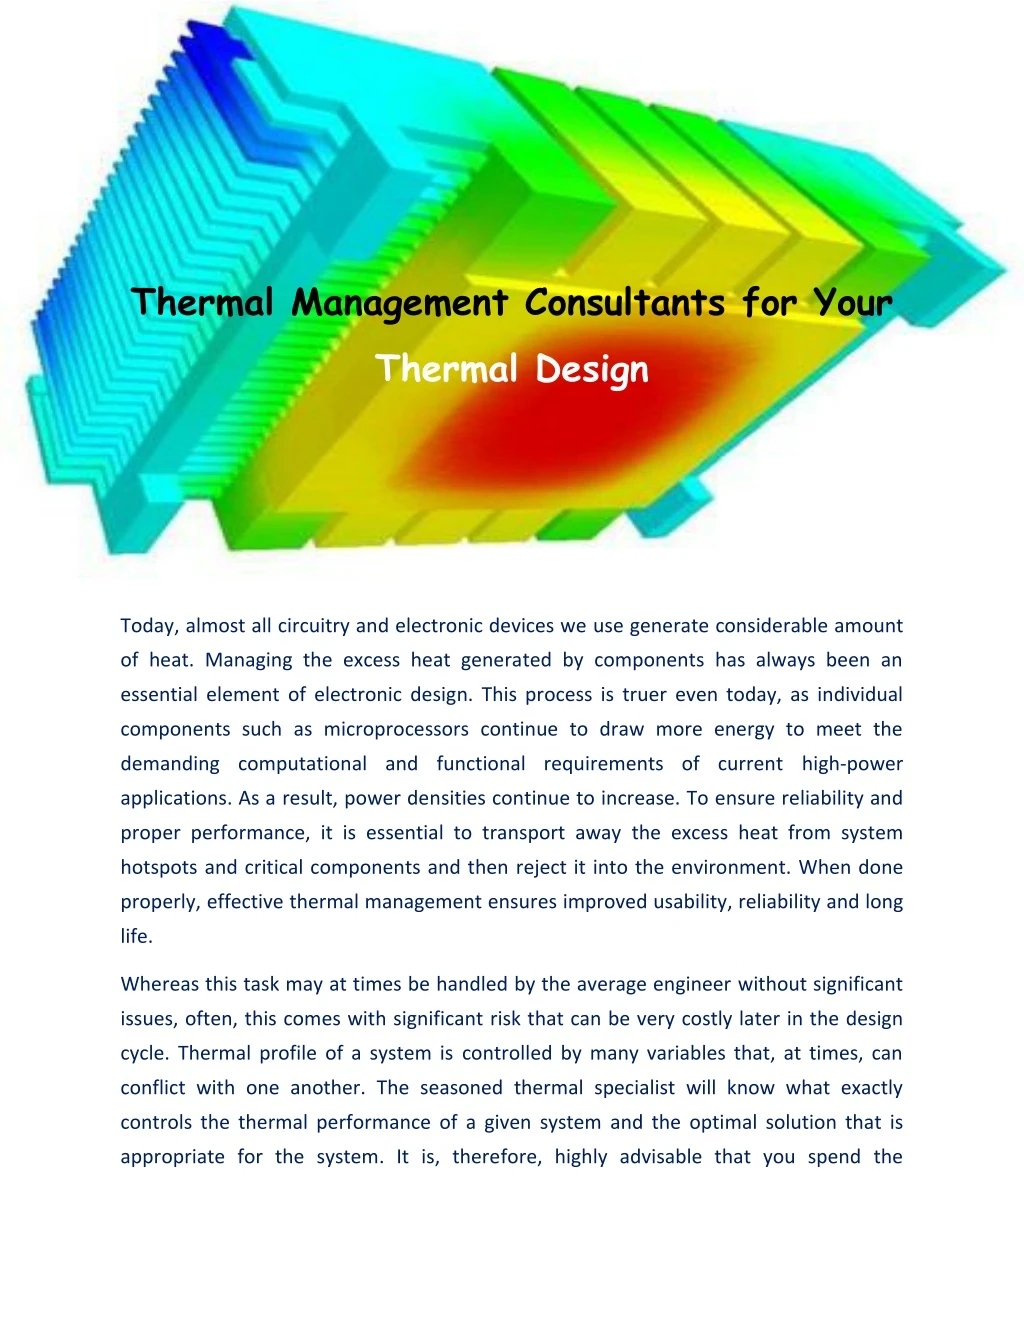 thermal management consultants for your thermal